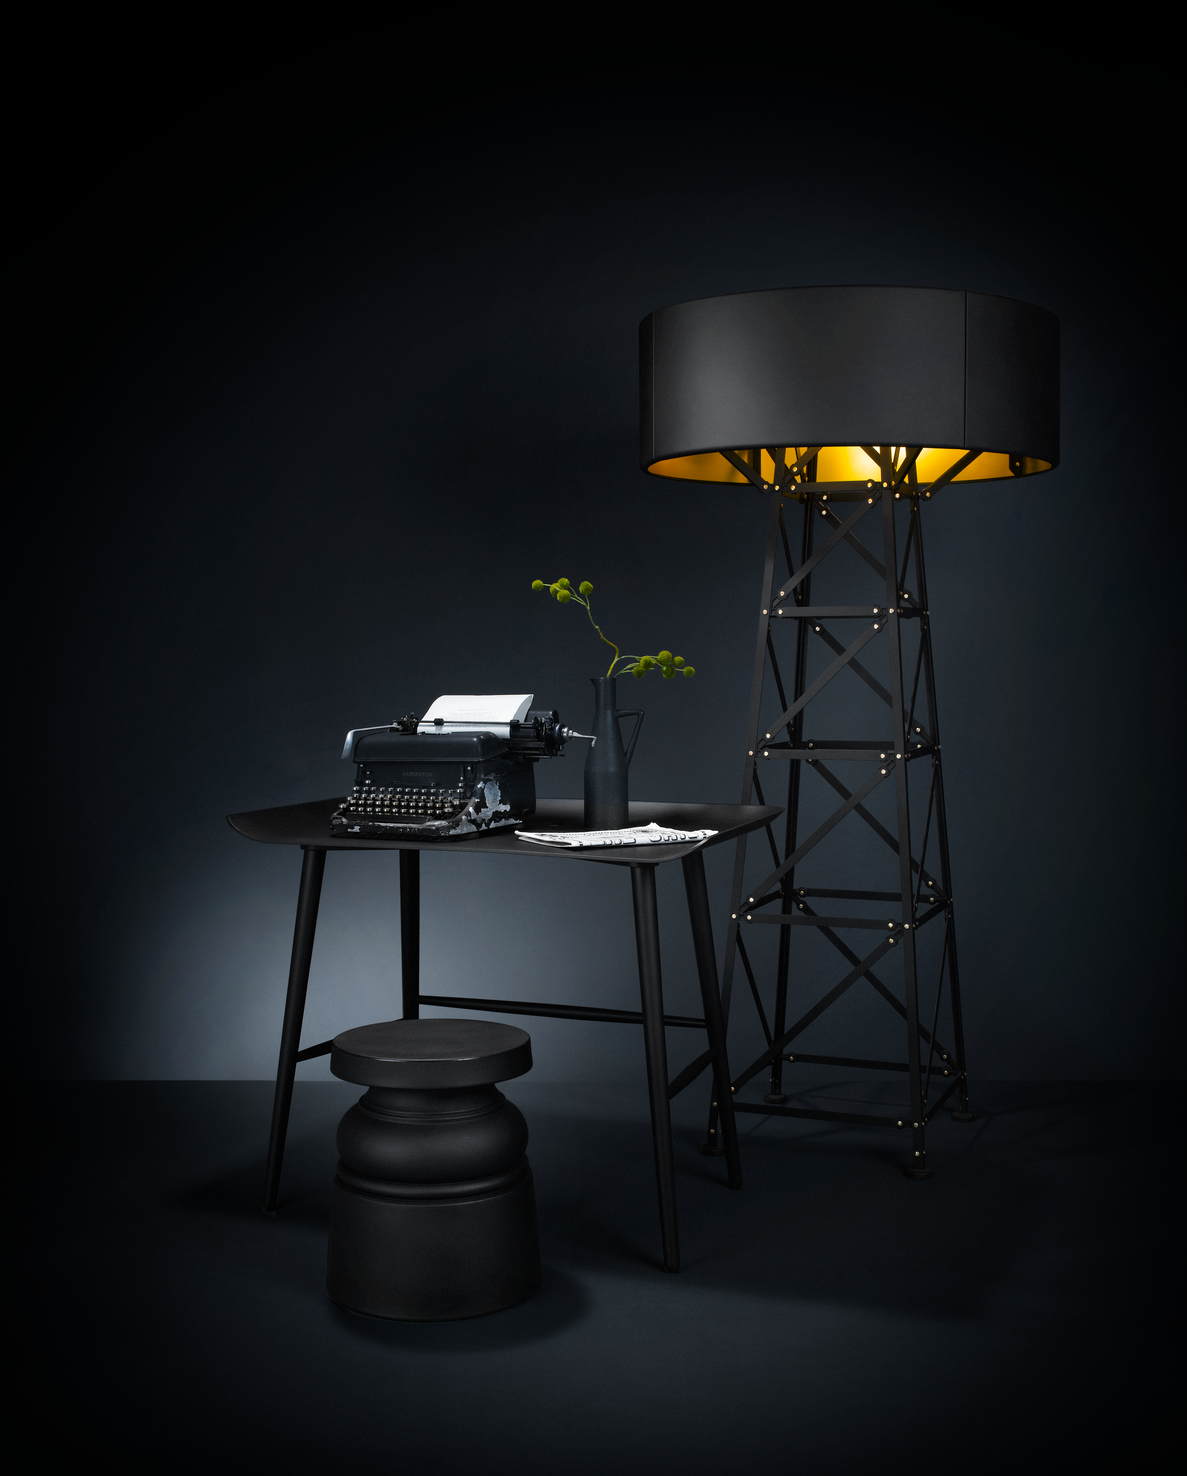 Poetic composition Construction Lamp, Woood desk and Container New Antiques Stool